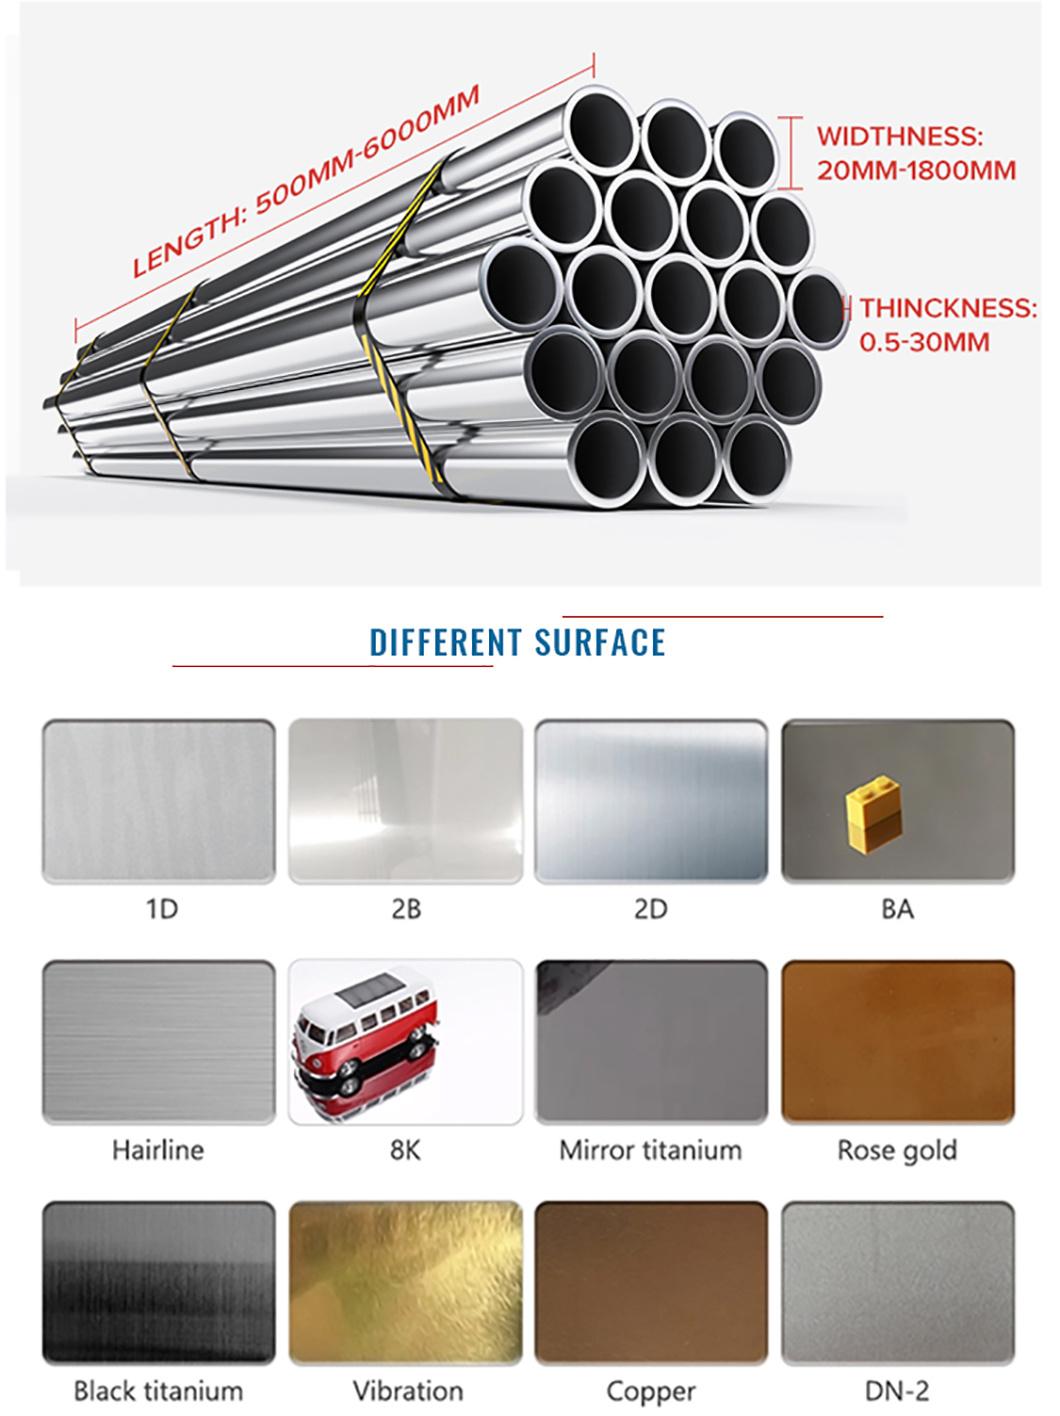 Wholesale Stainless Steel Square Rectangular Pipe 316 Tube